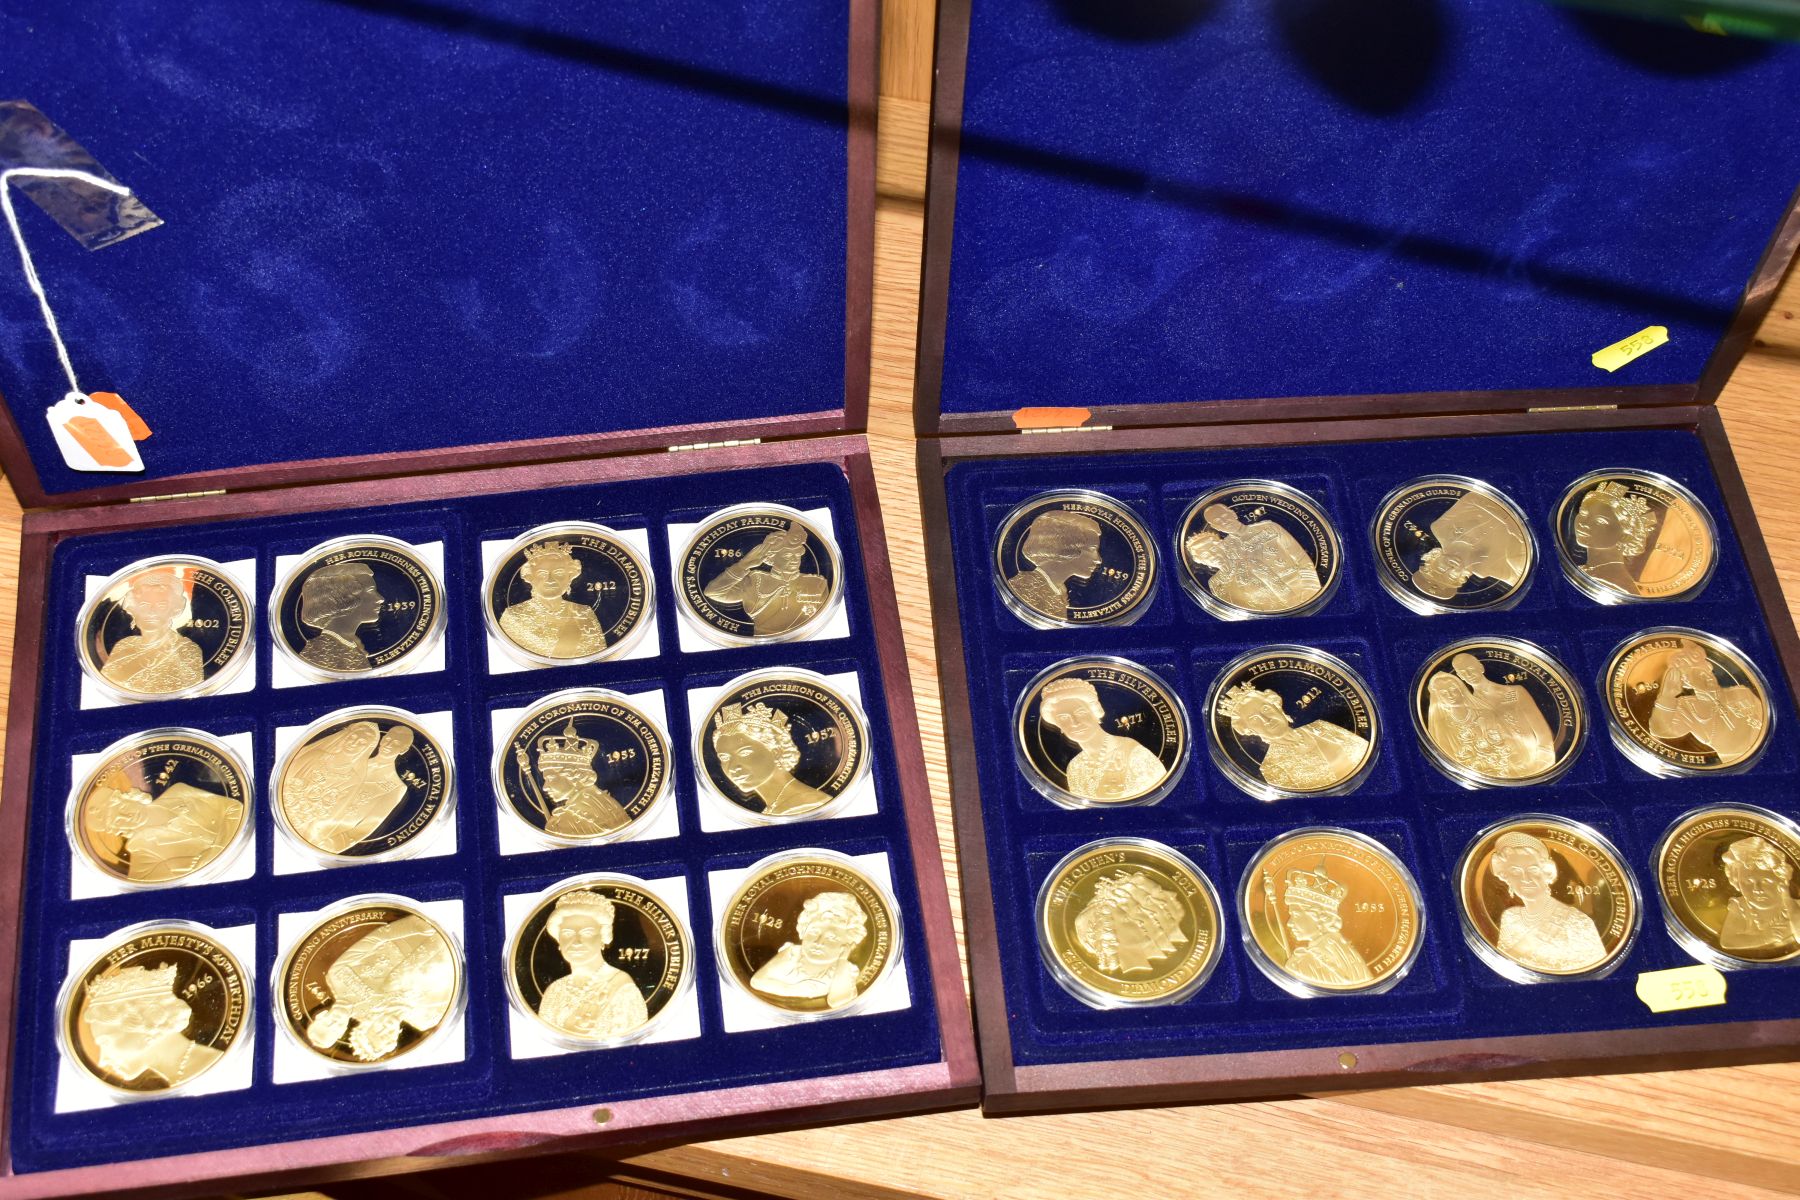 TWO COMMEMORATIVE GOLD PLATED PROOF COIN SETS, each coin featuring portraits of Queen Elizabeth II